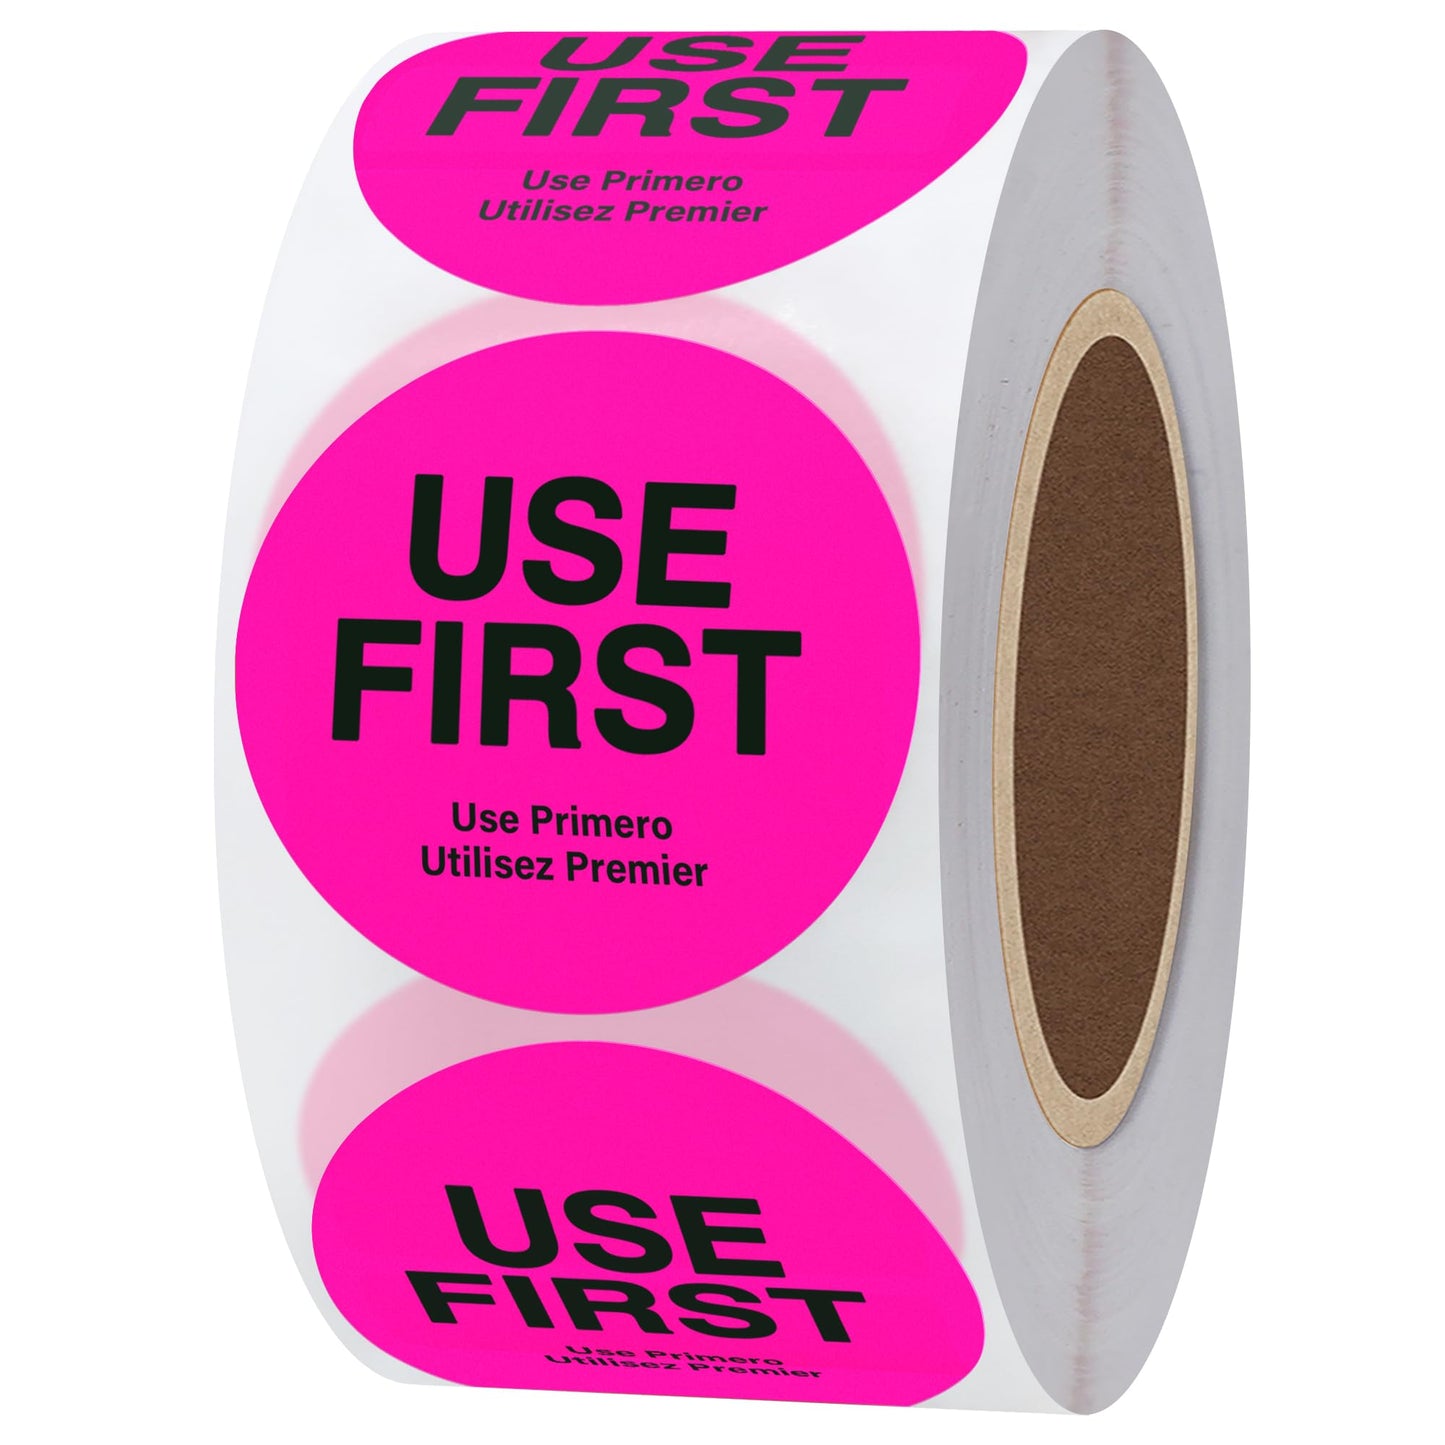 Hybsk 1.5 Inch Fluorescence"USE First" Stickers Restaurant Kitchen Food Service FIFO Label Total 500 Labels Per Roll